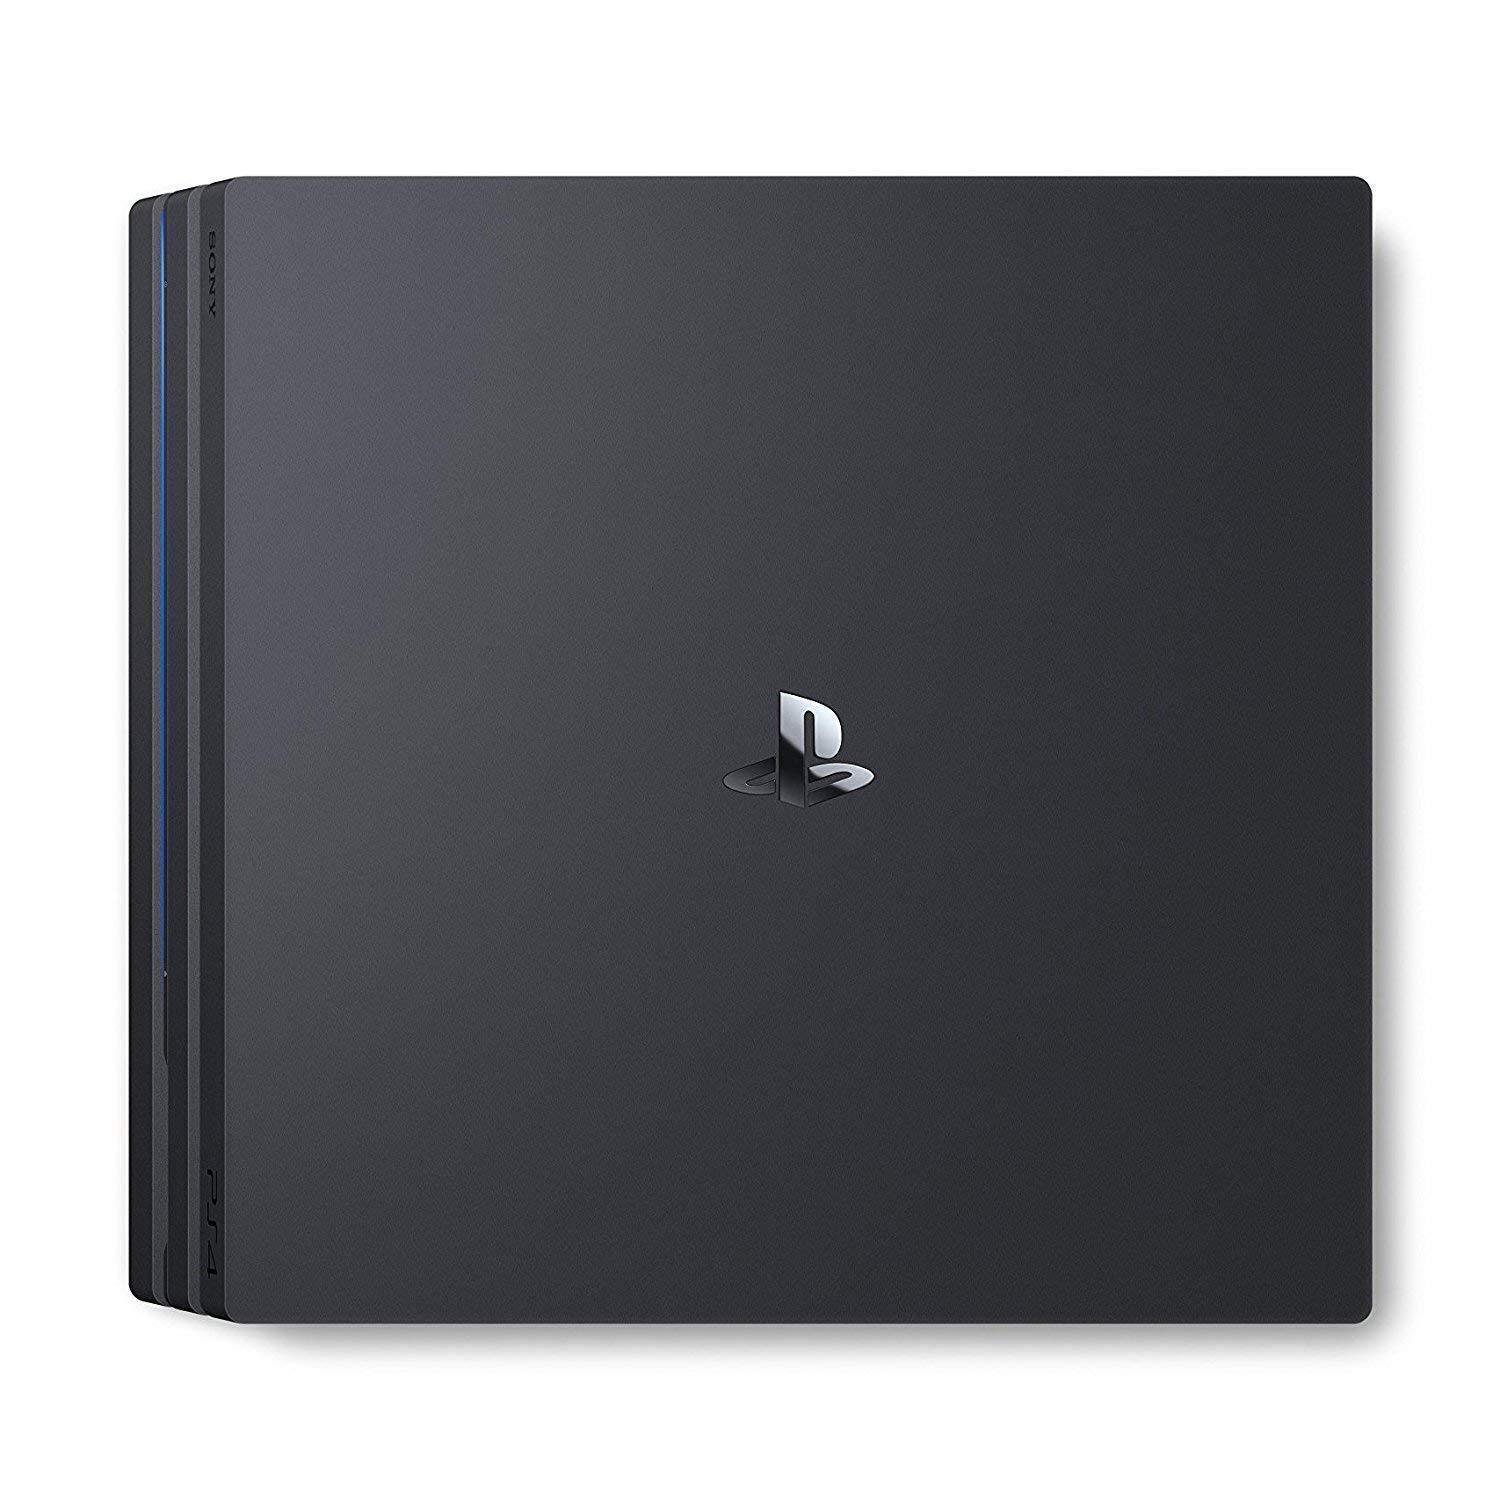 NEW Model SONY Playstation 4(PS4) Pro Game Console JET BLACK 1TB  CUH-7200BB01